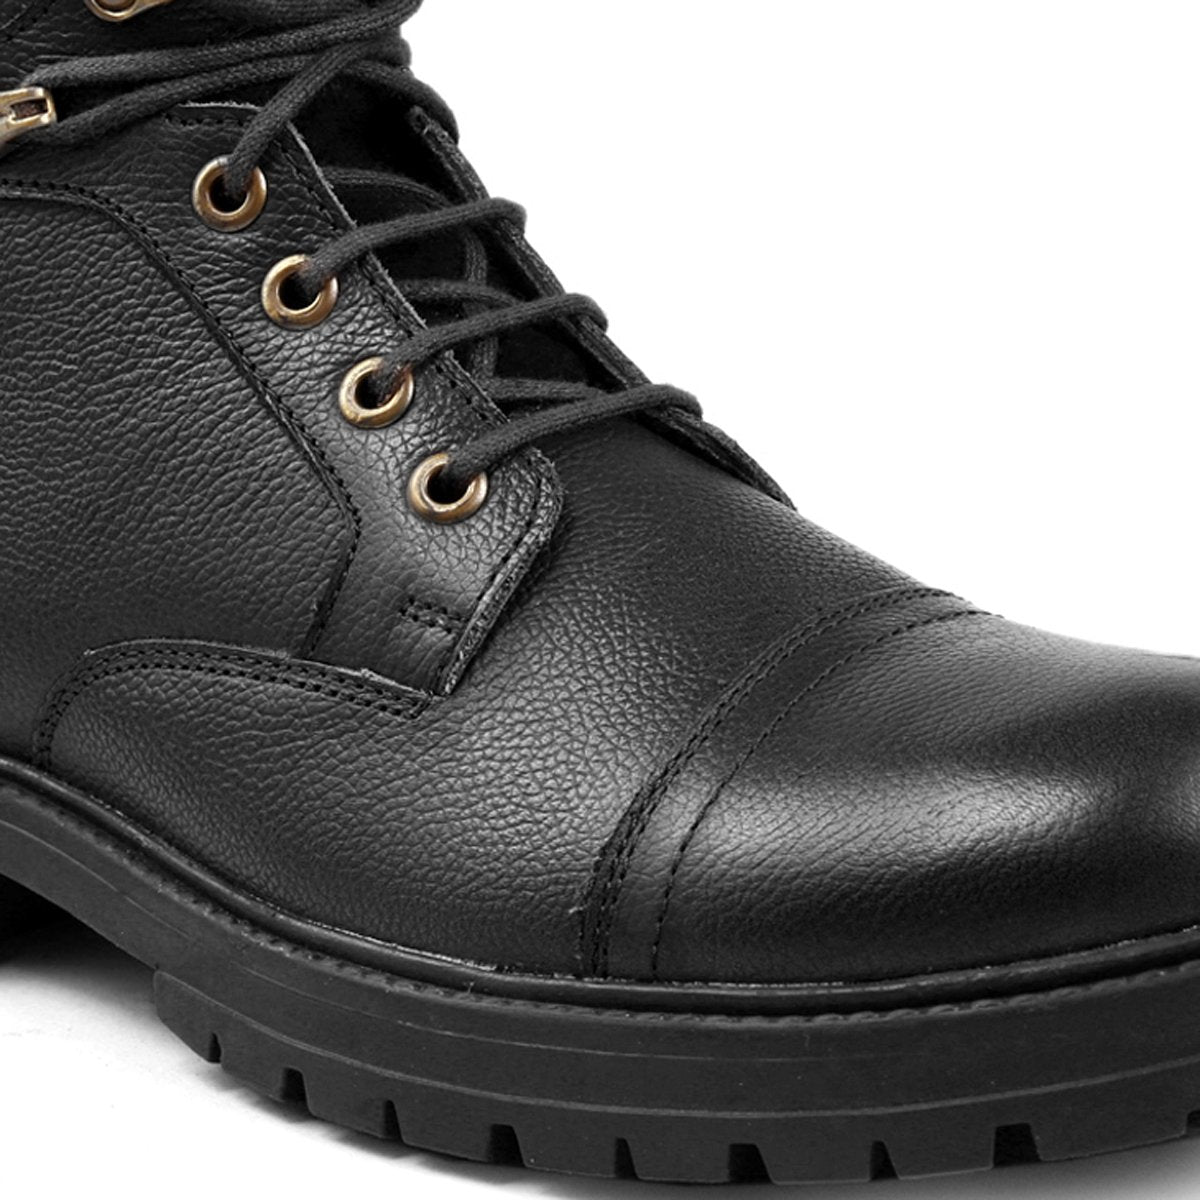 derby boots men, men chukka boots, genuine leather boots, black leather boots, motorcycle boots, biking boots, water resistant boots